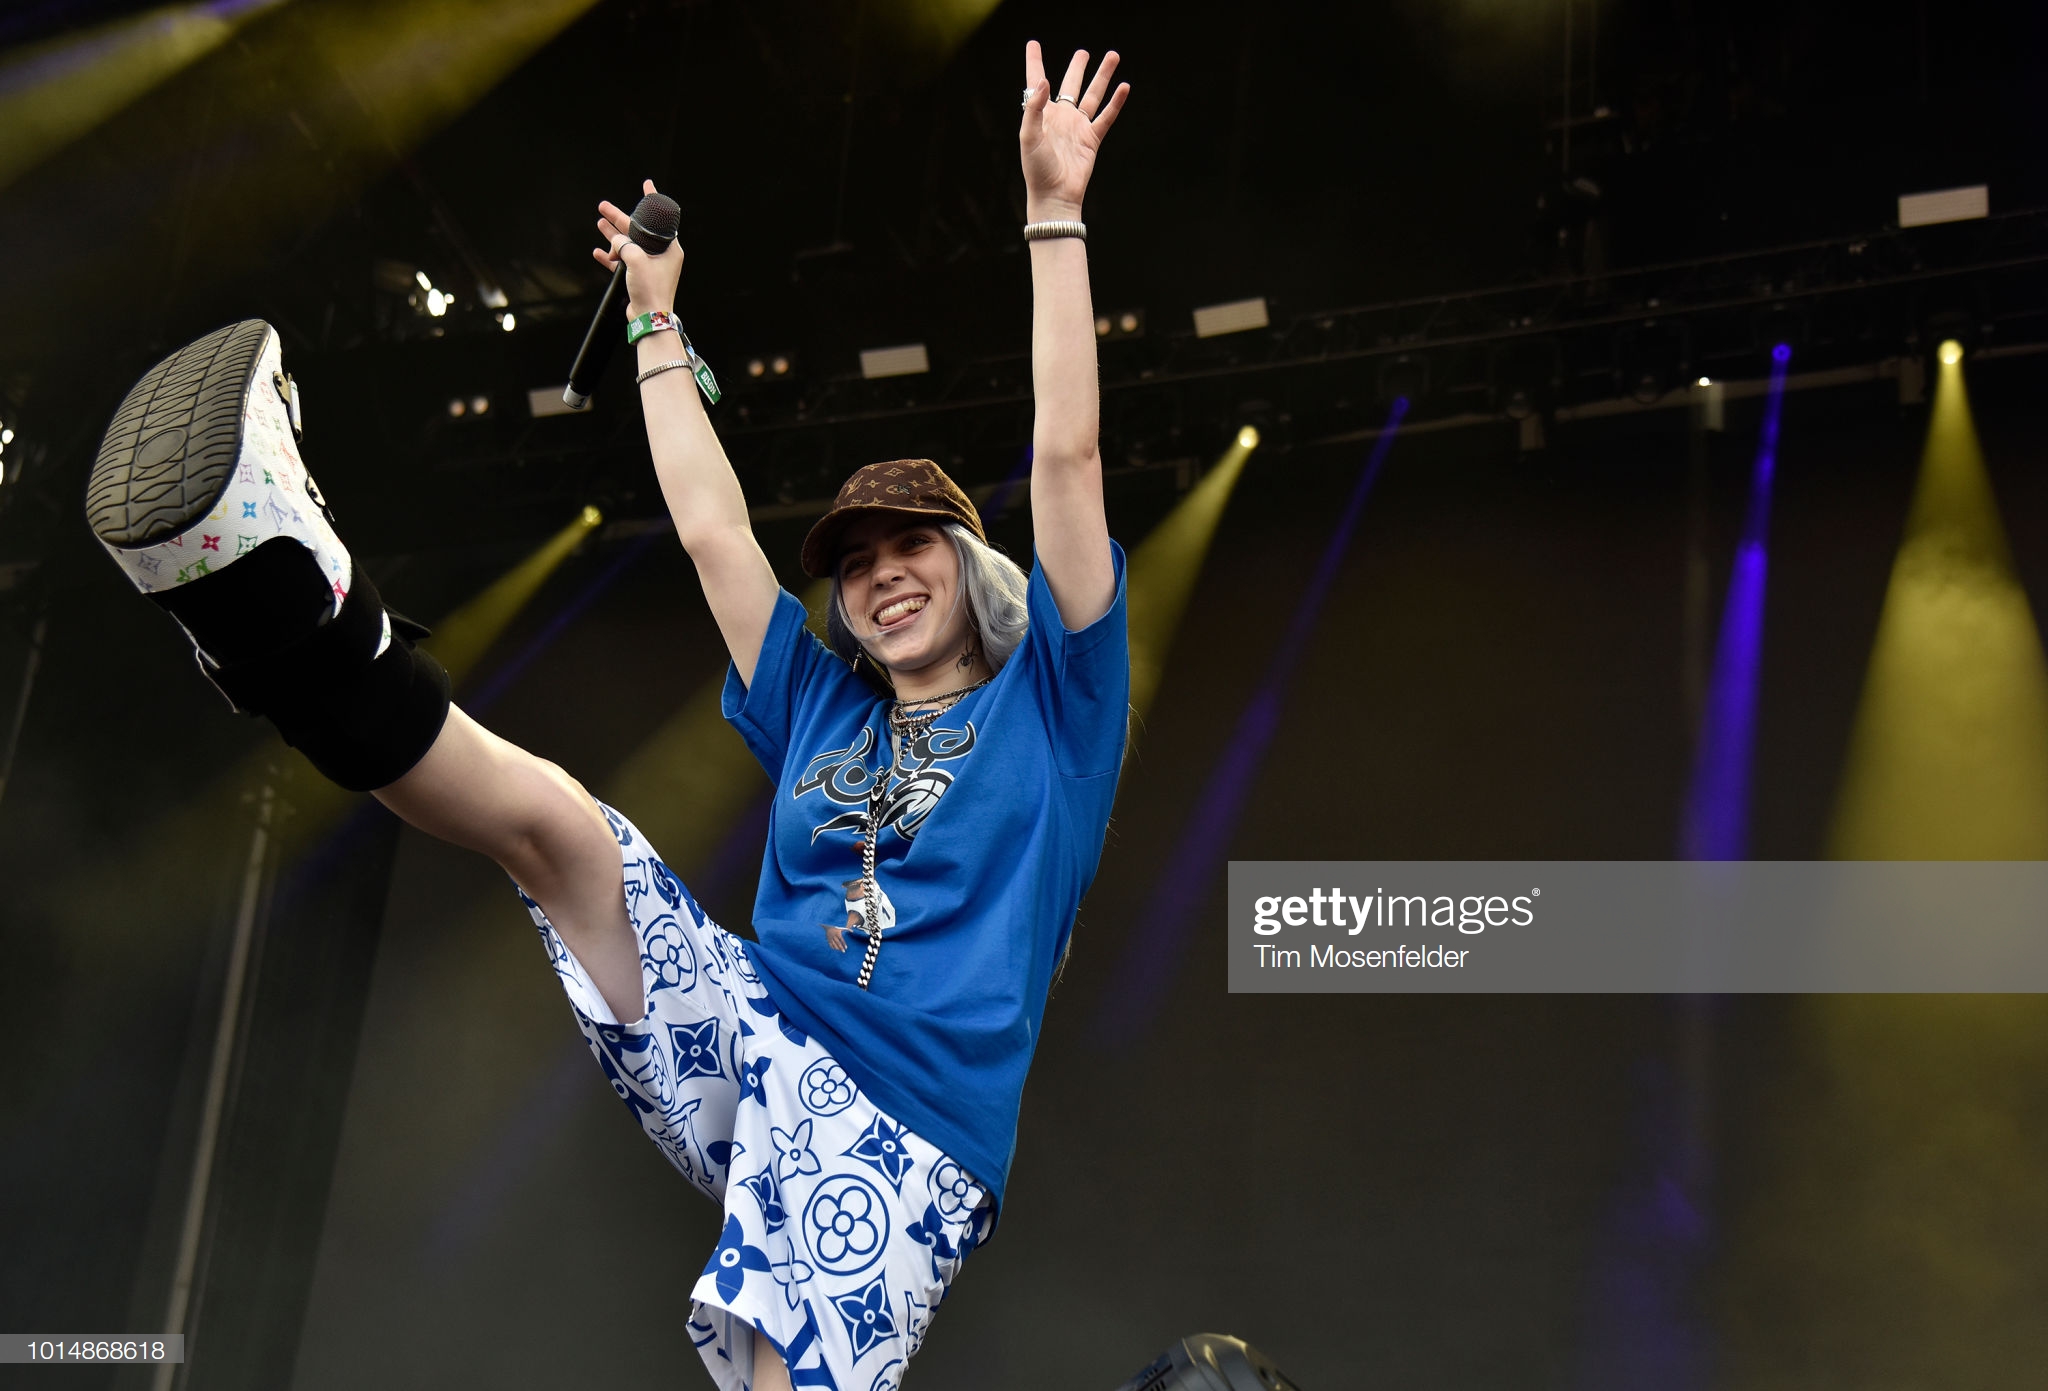 gettyimages-1014868618-2048x2048.jpg